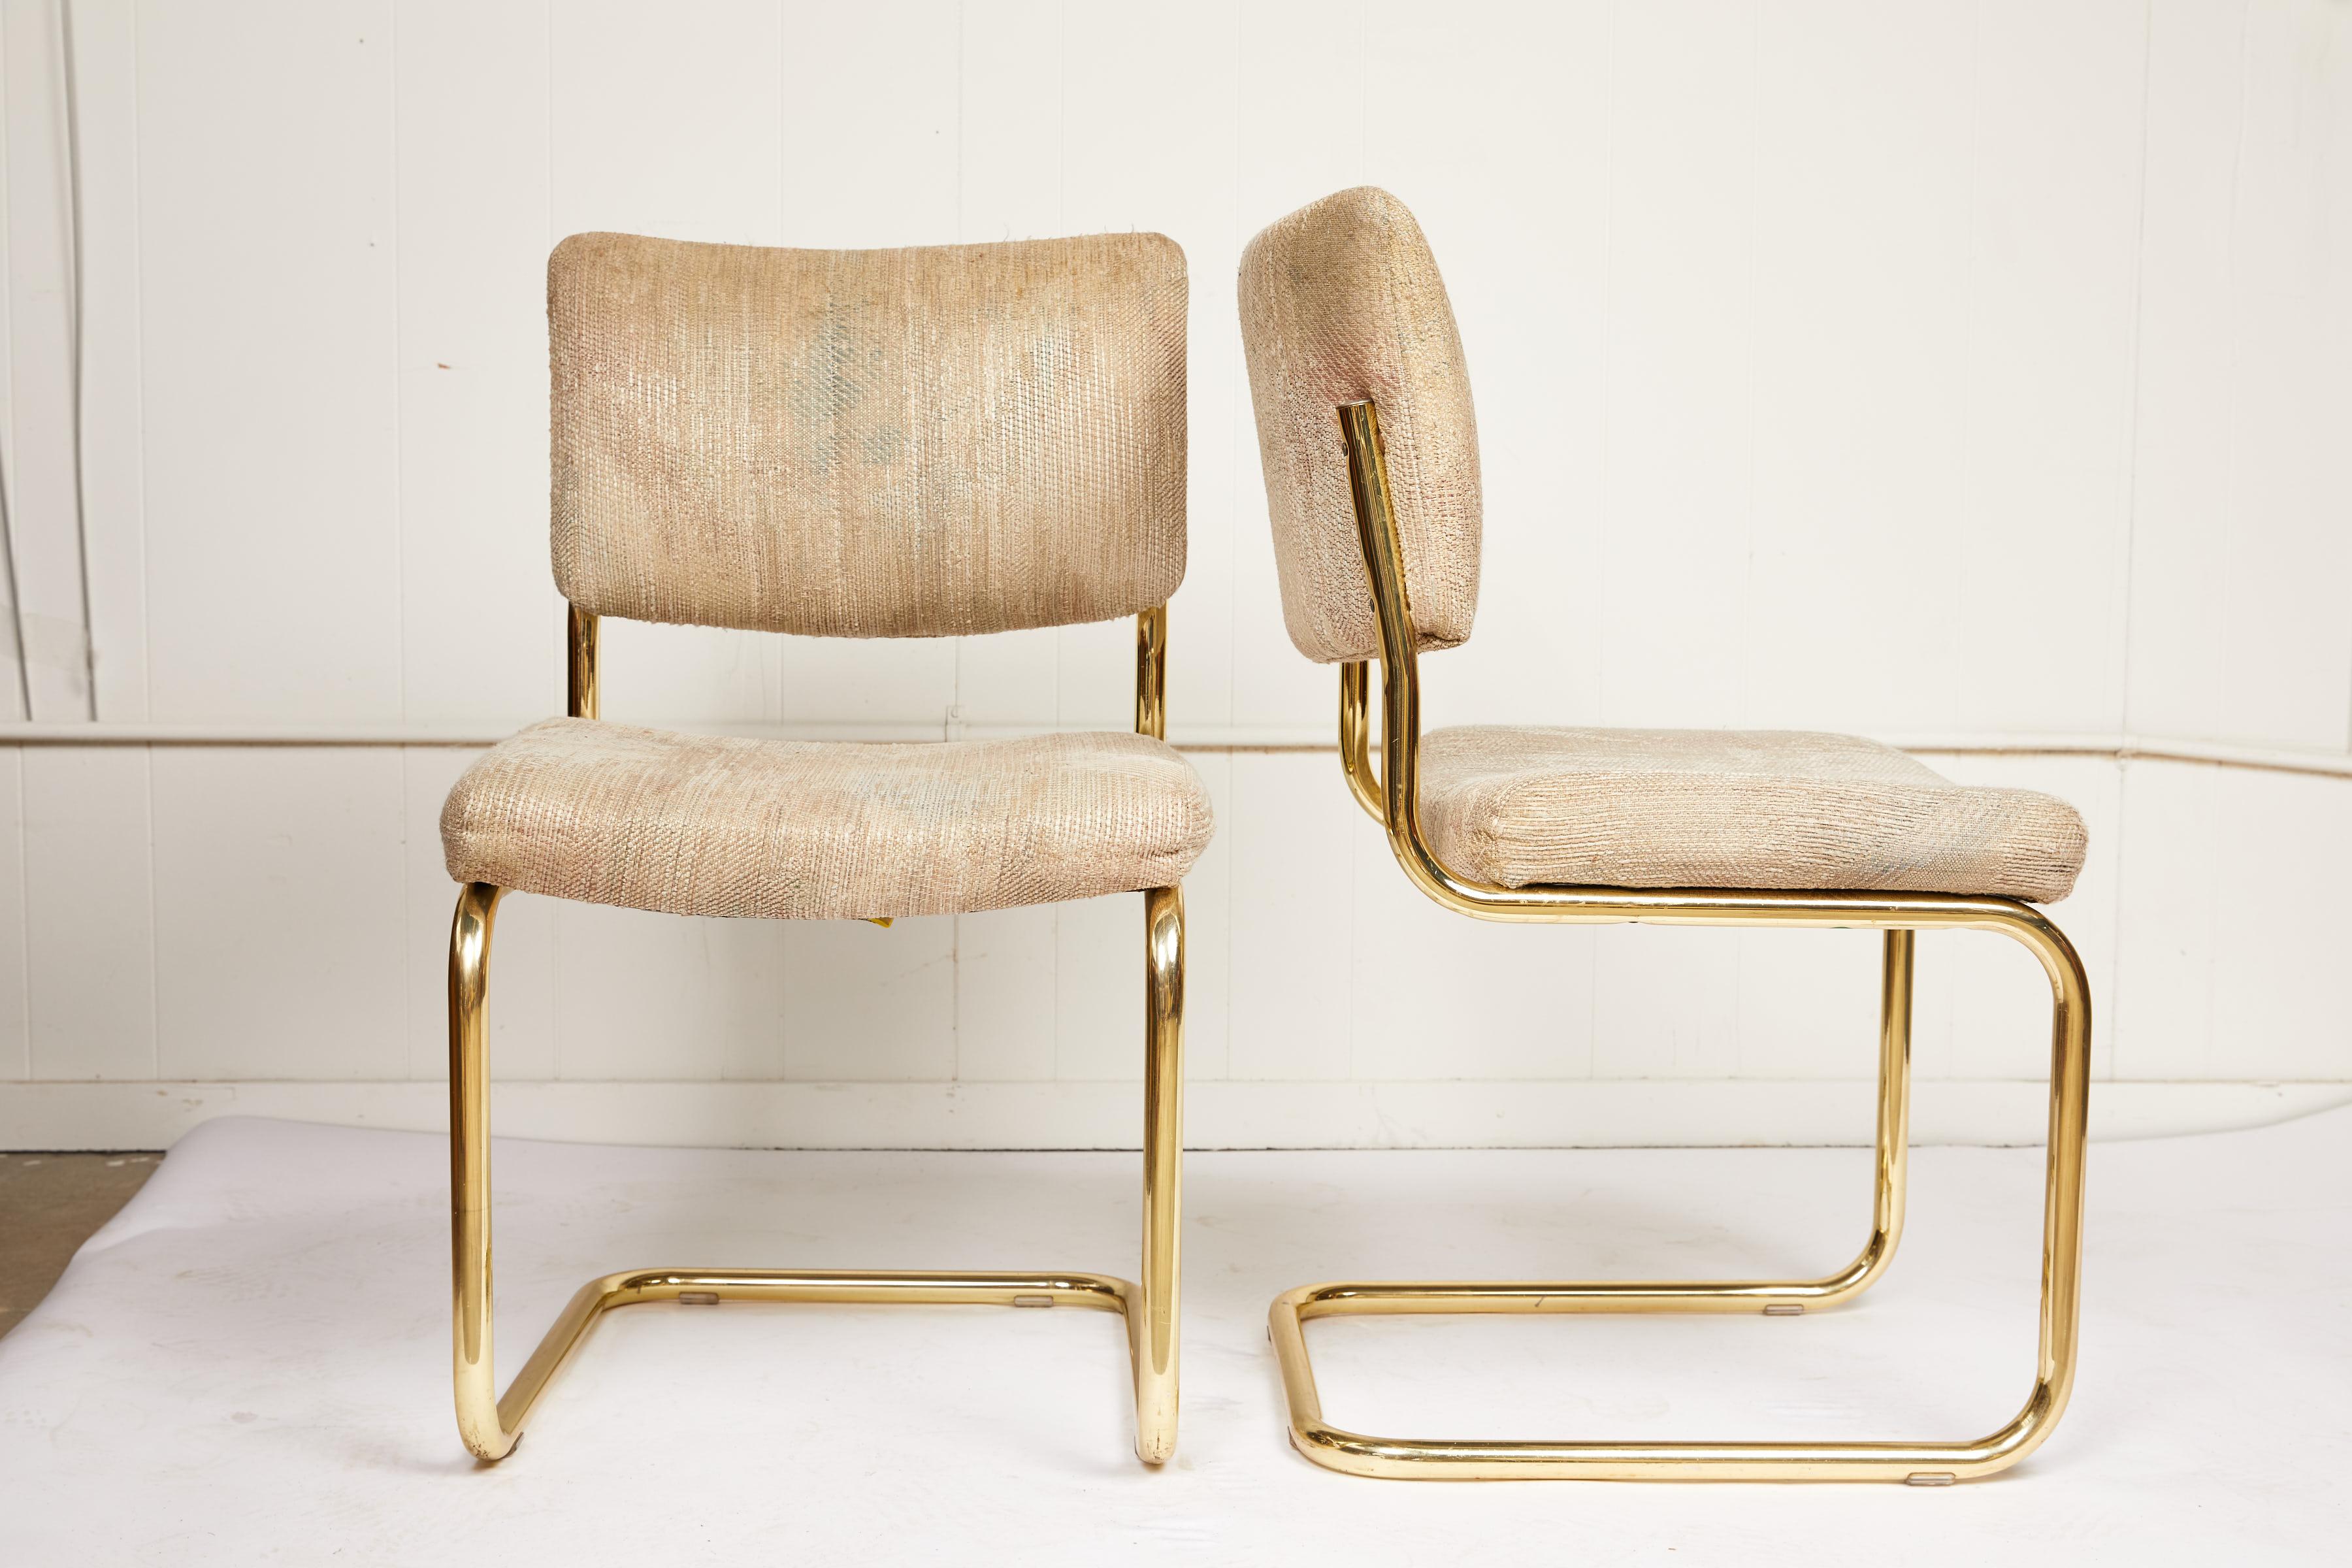 20th century pair of cantilever chairs made of tubular brass frames and manufactured by Chromcraft. The chair seats and backs feature the original upholstery. The cushions are in good condition but the fabric should be replaced.